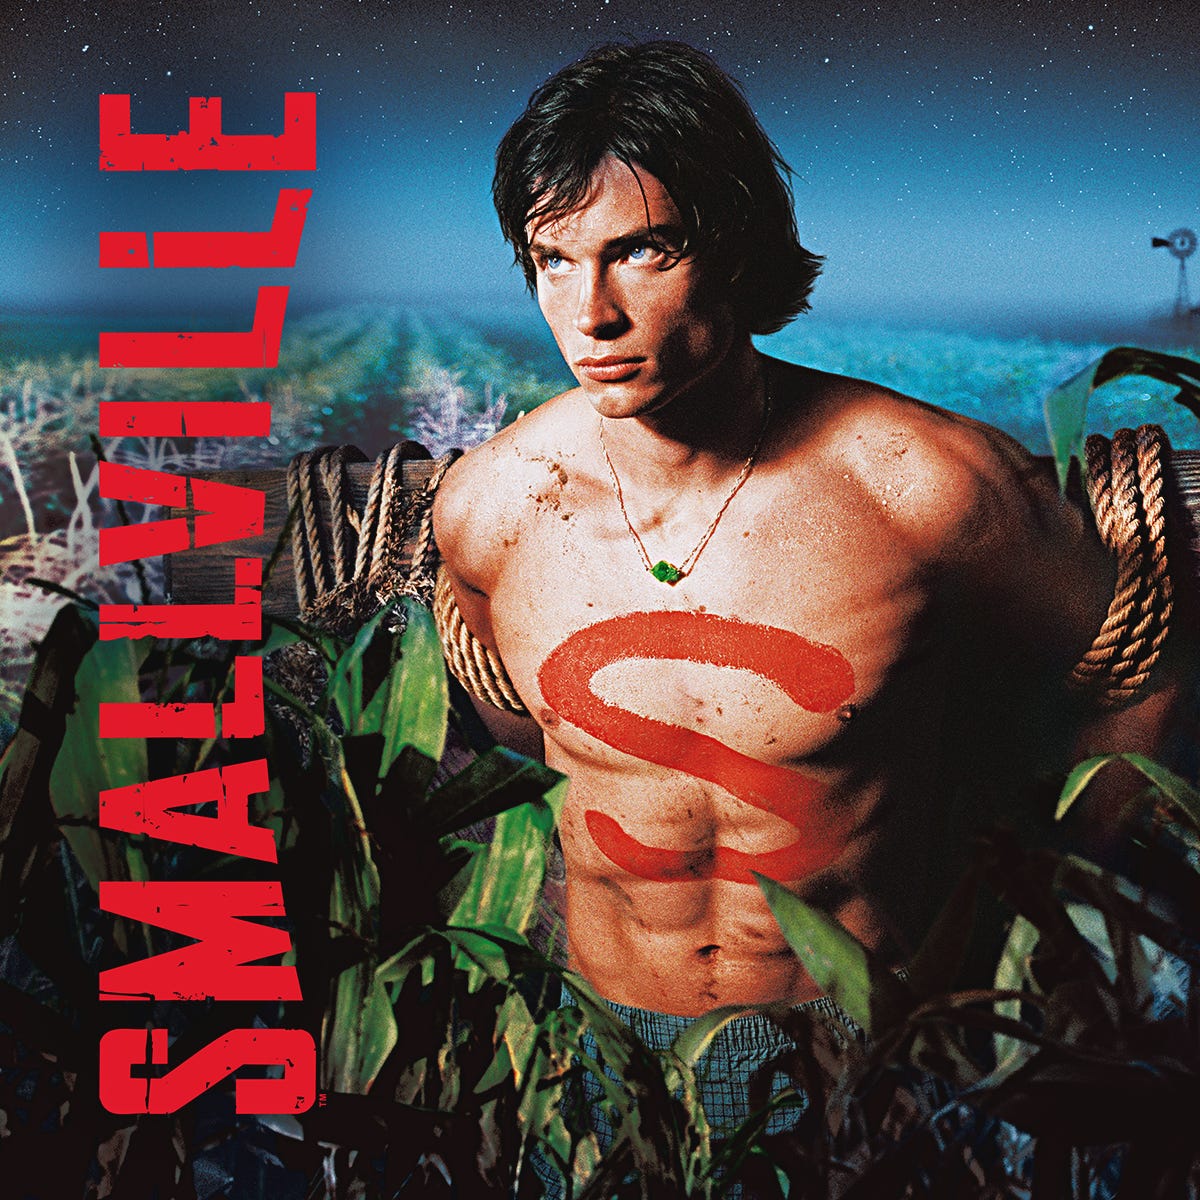 Smallville poster feature Clark Kent, tied up, with an 'S' painted on his chest. The Smallville logo is featured prominently.